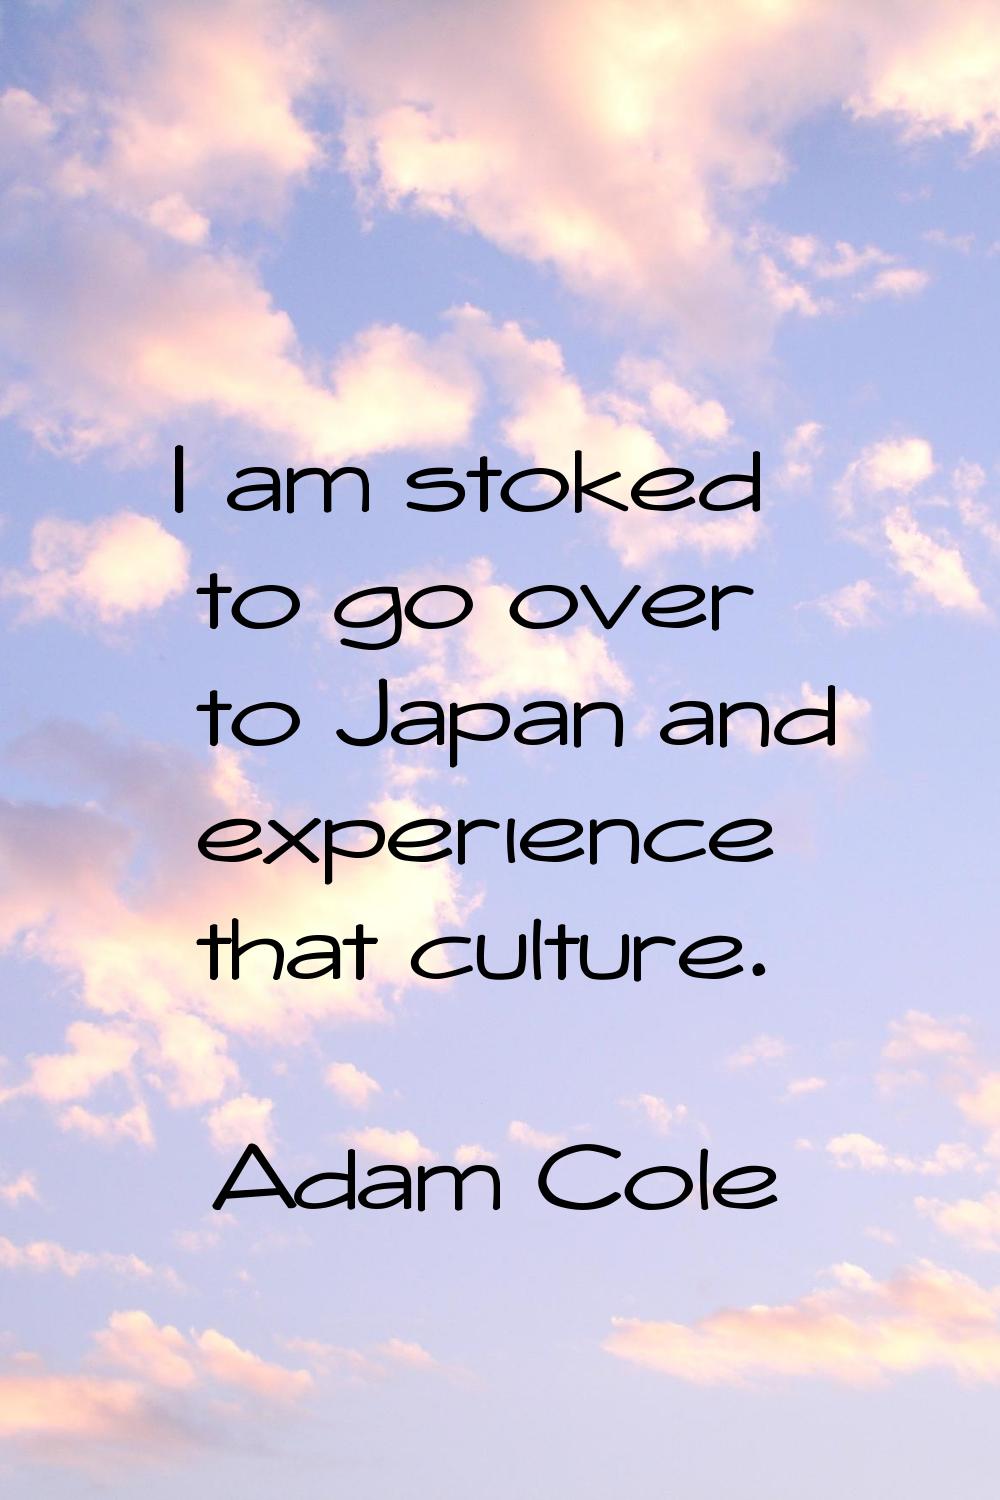 I am stoked to go over to Japan and experience that culture.